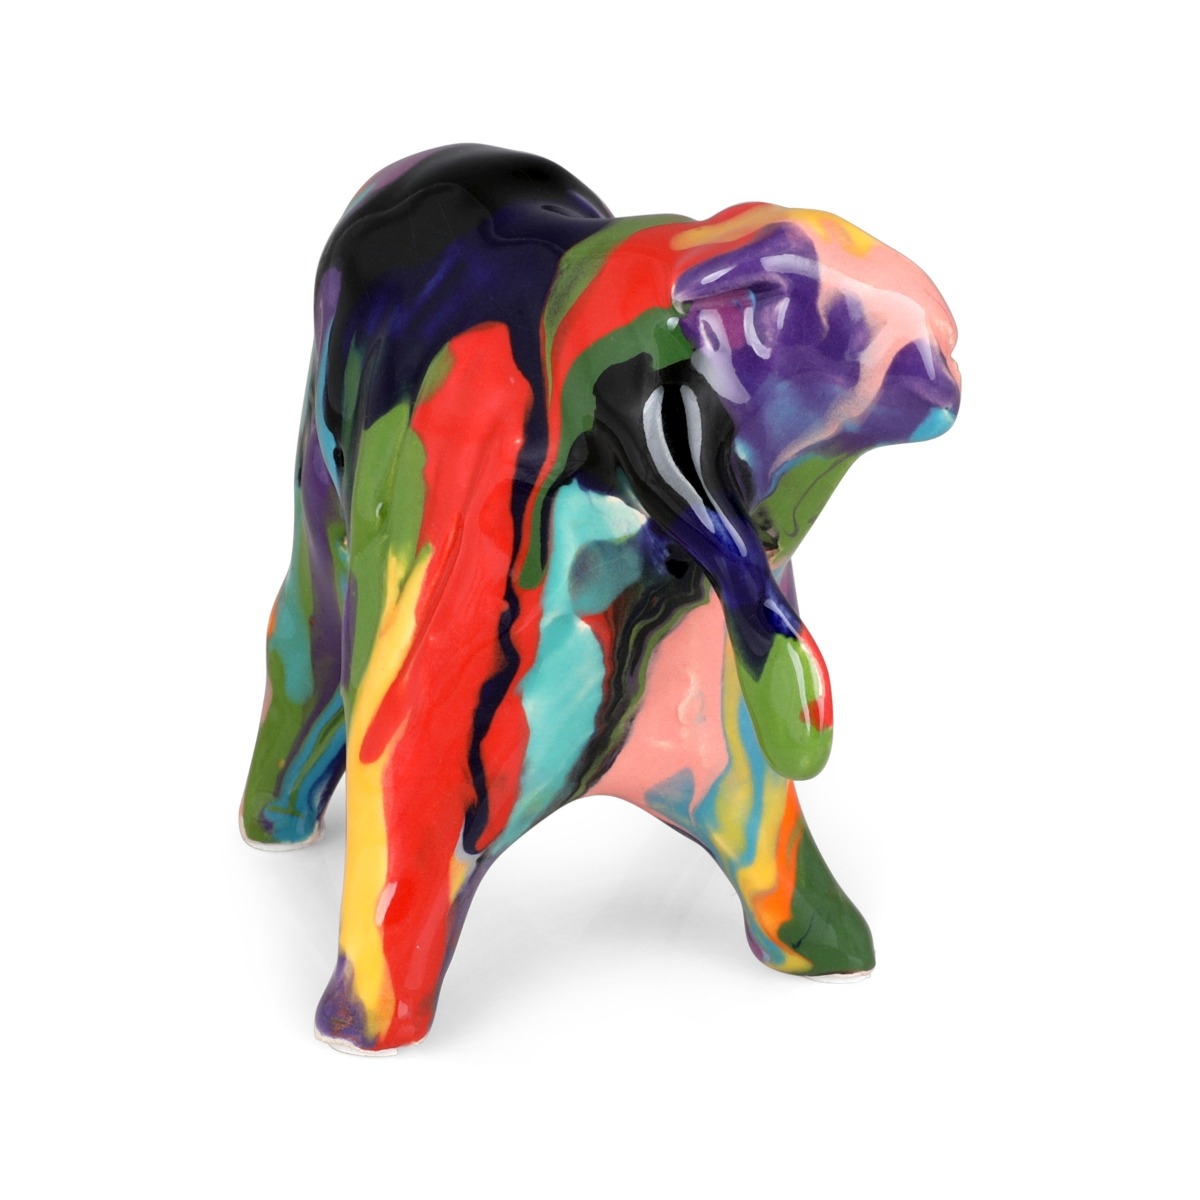 Handcrafted Multicolored Glass Sheep Figurine - 1